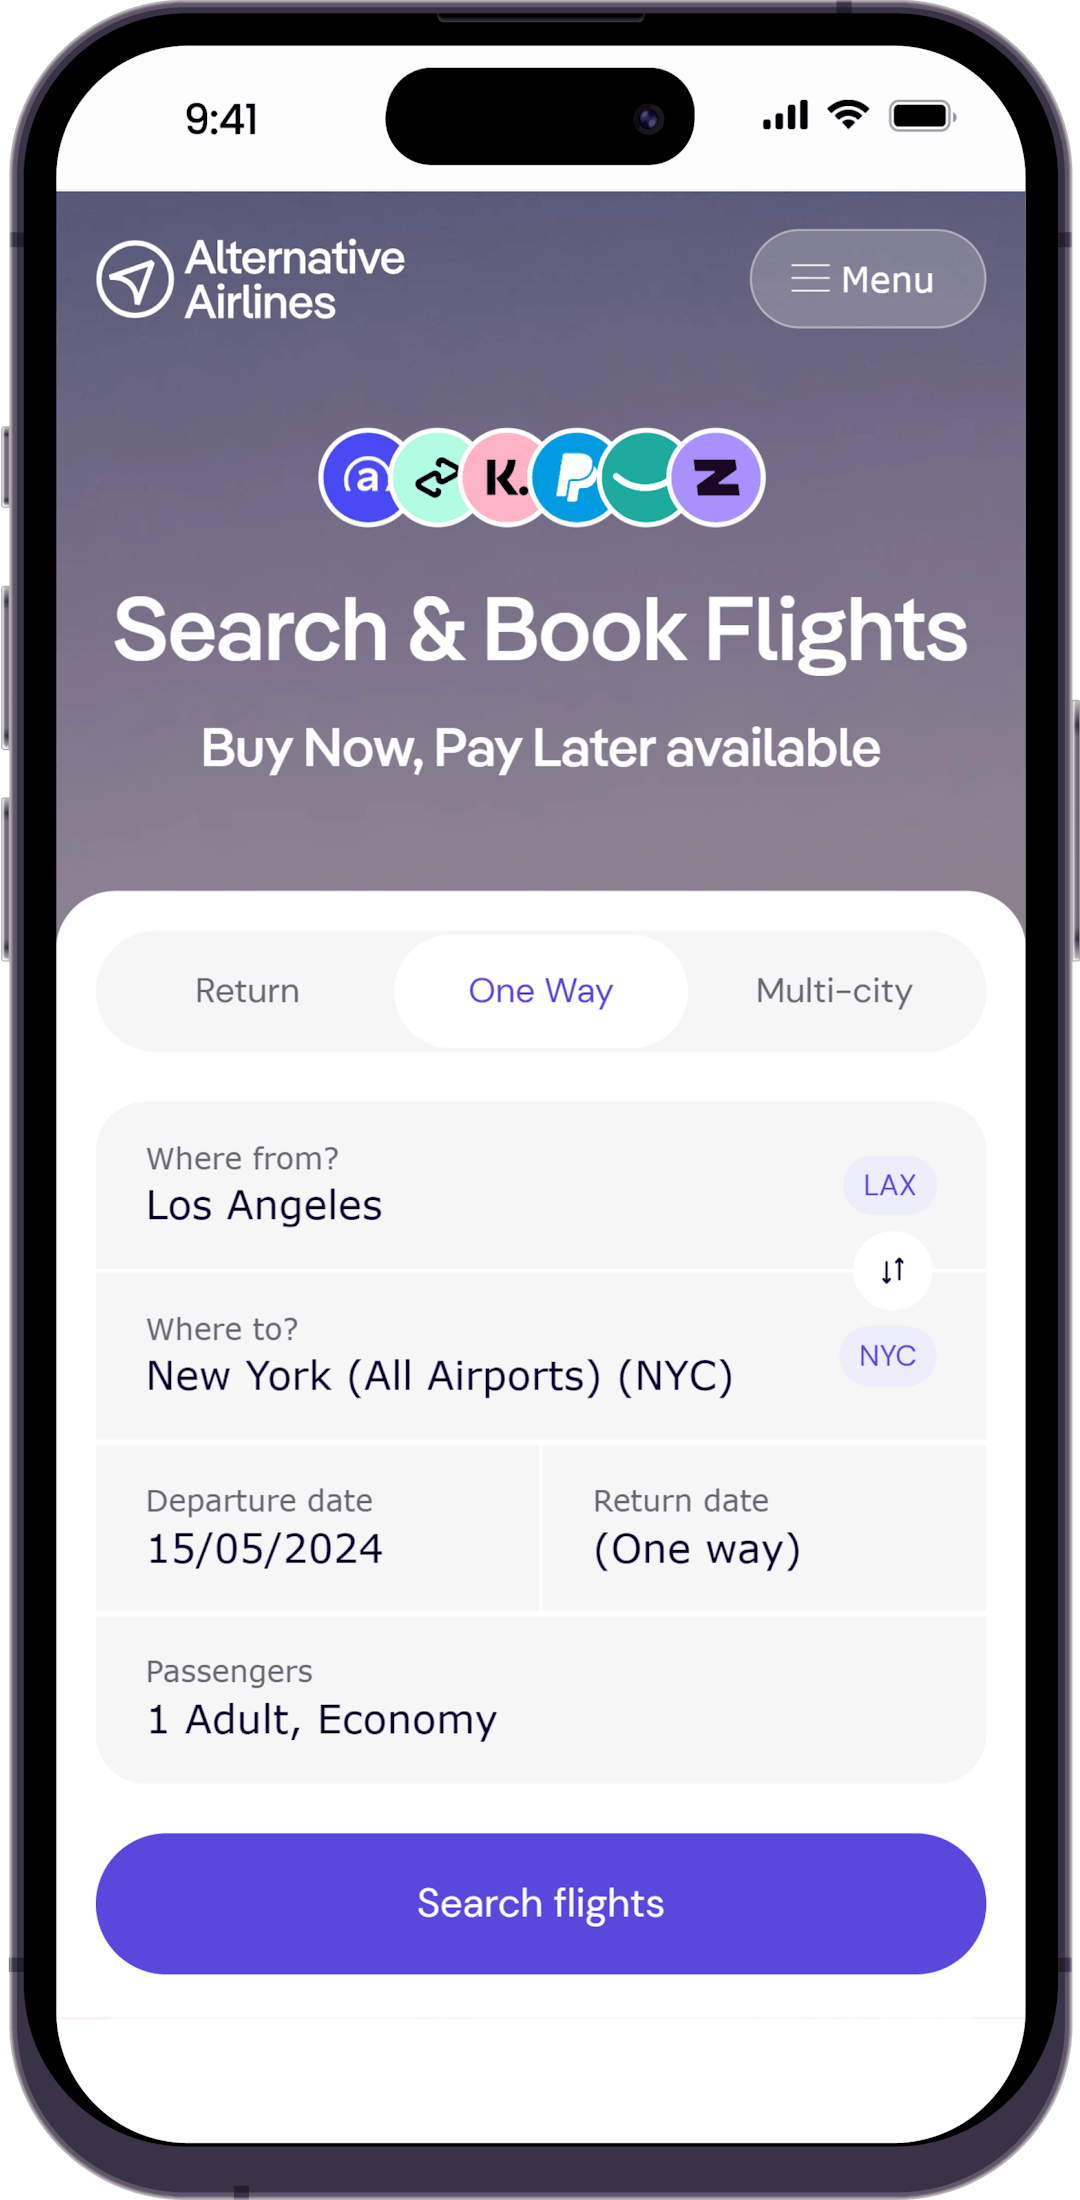 Step 1 - Search for flights in search form